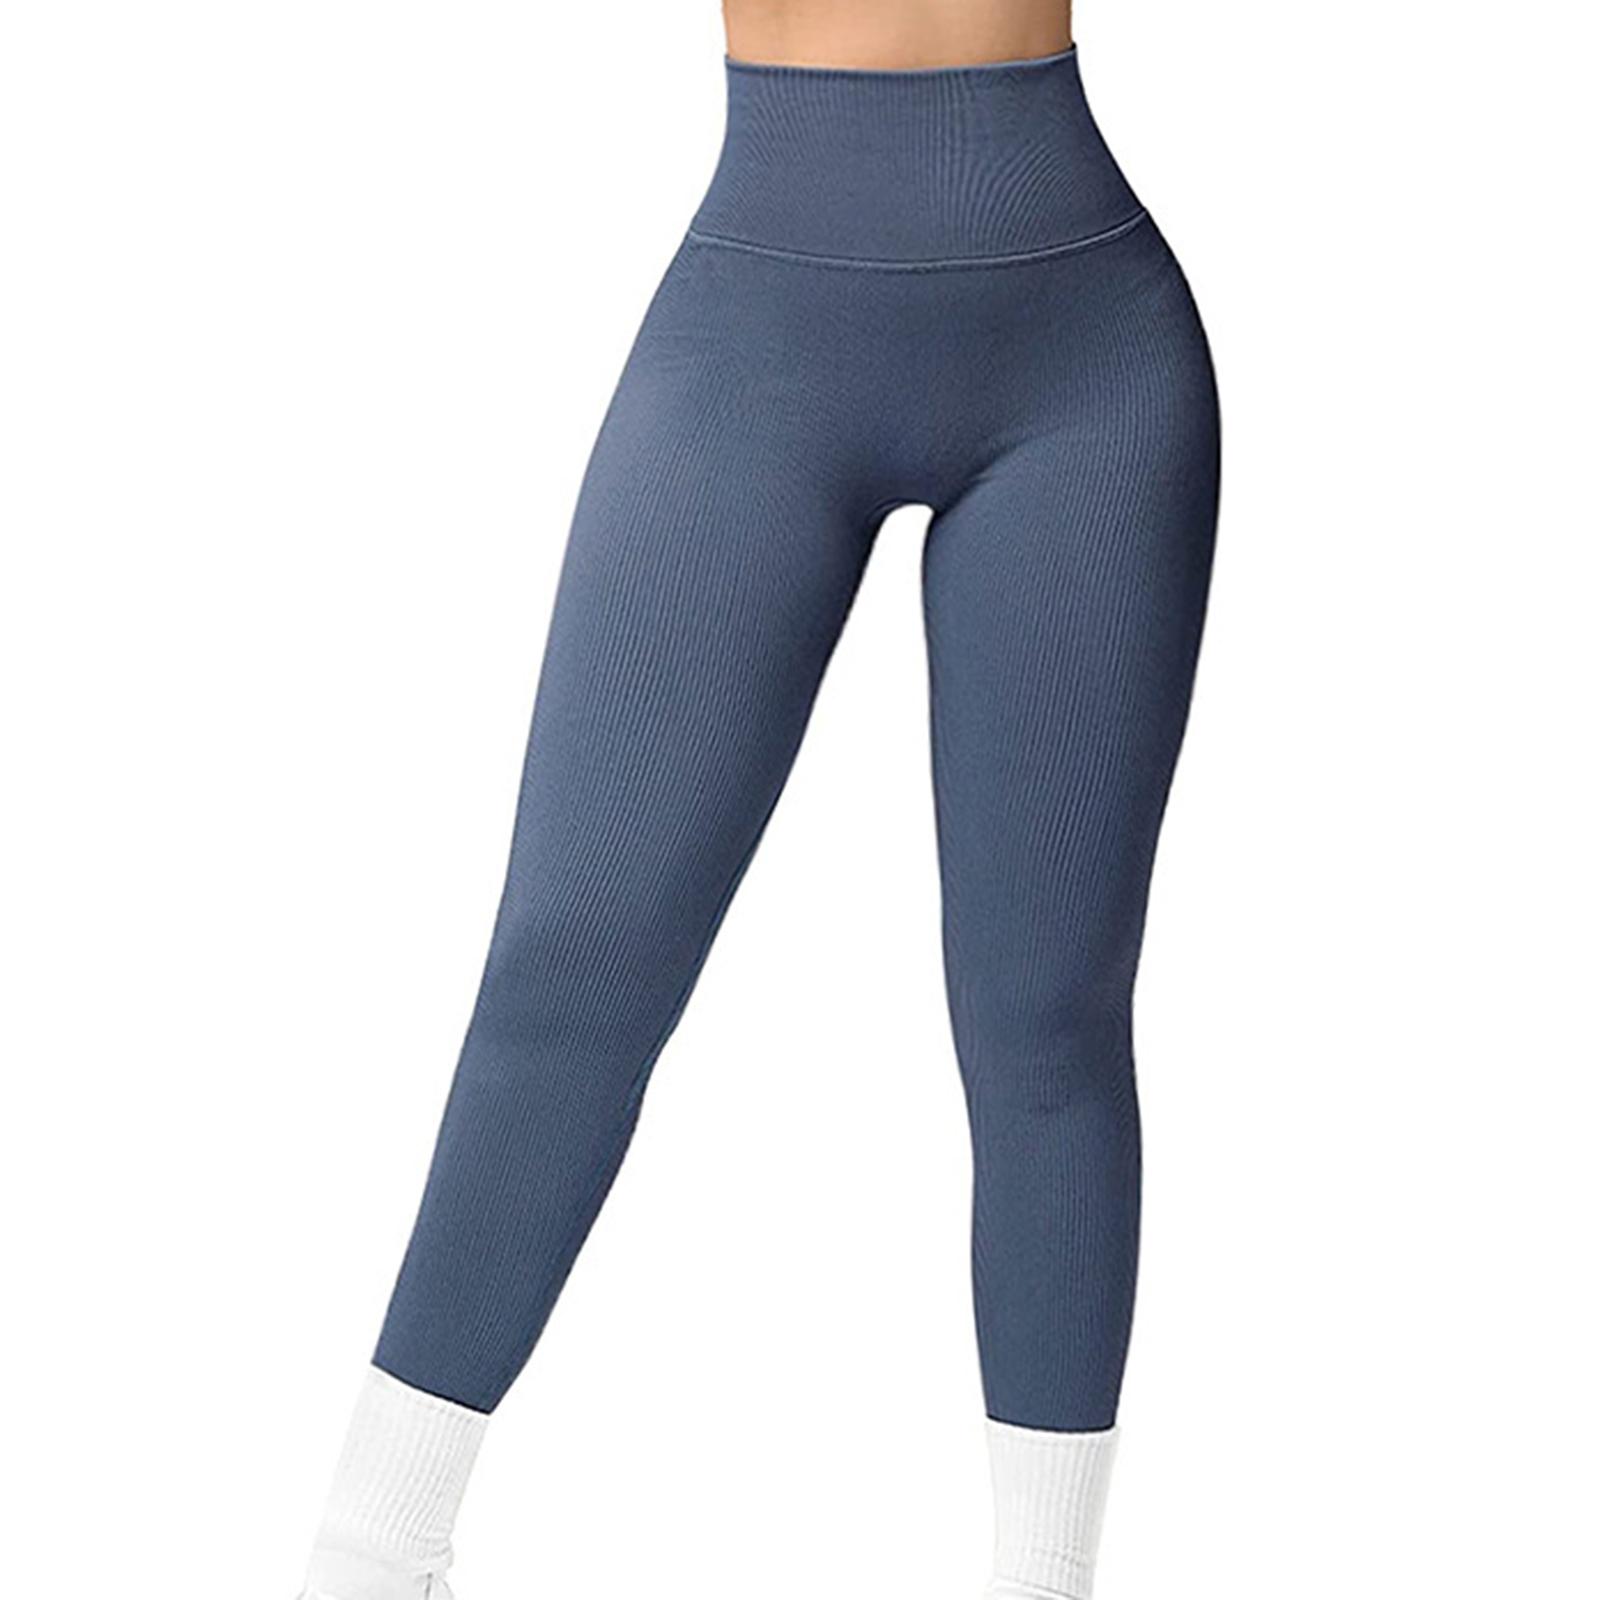 Womens Yoga Pants High Waist Leggings Stretch for Running Exercise Workout Blue Gray S